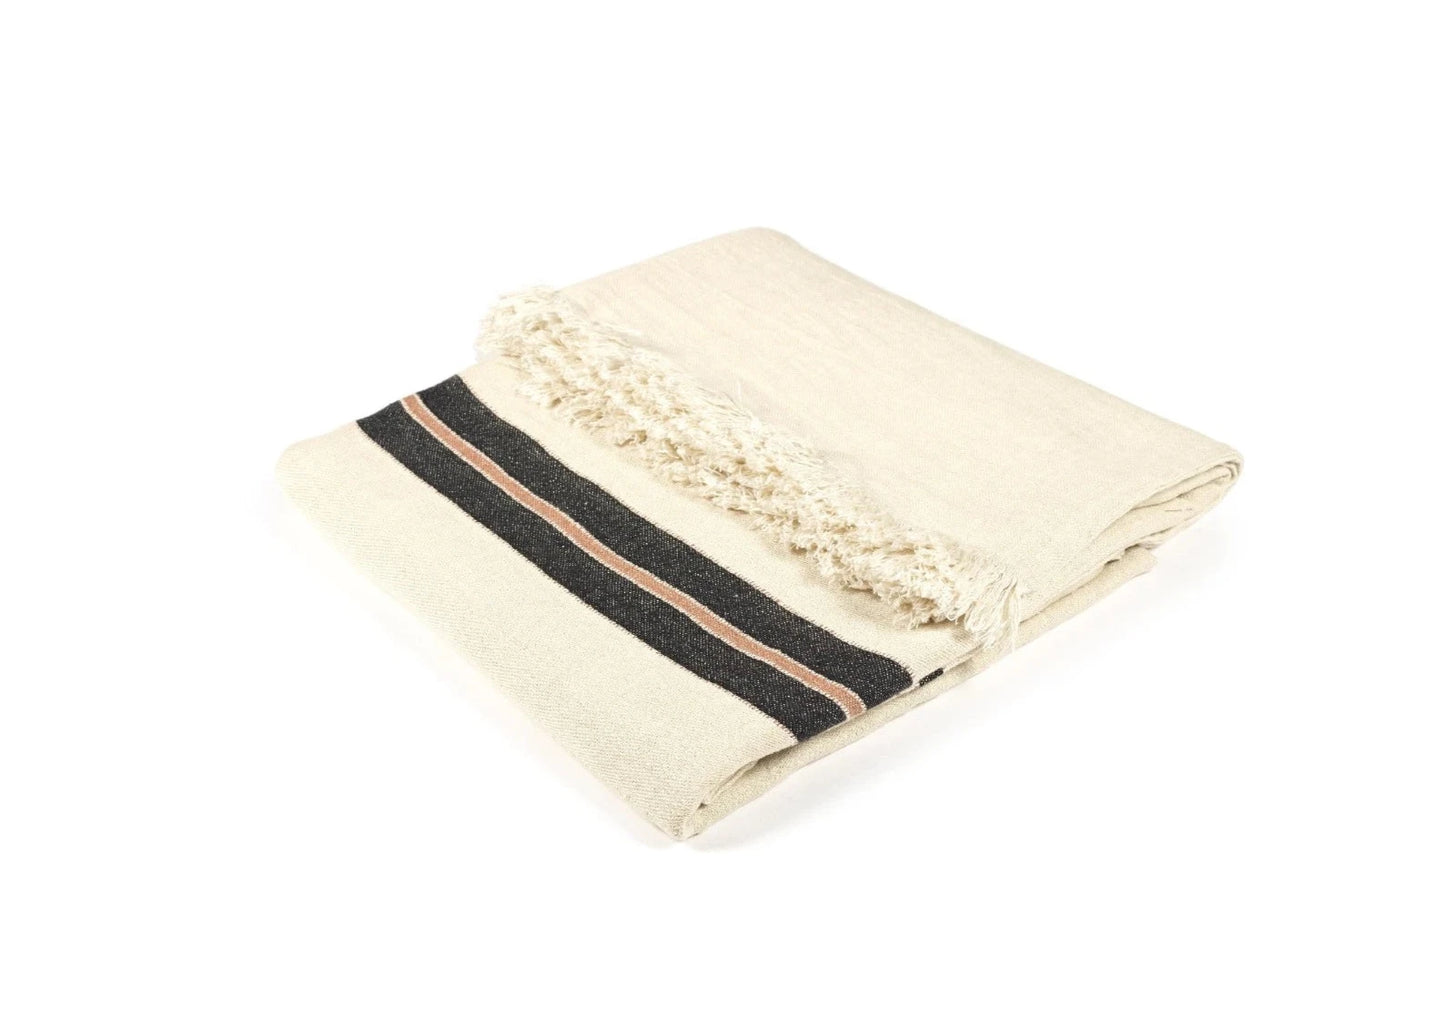 Antique White Patagonian Stripe Coverlet